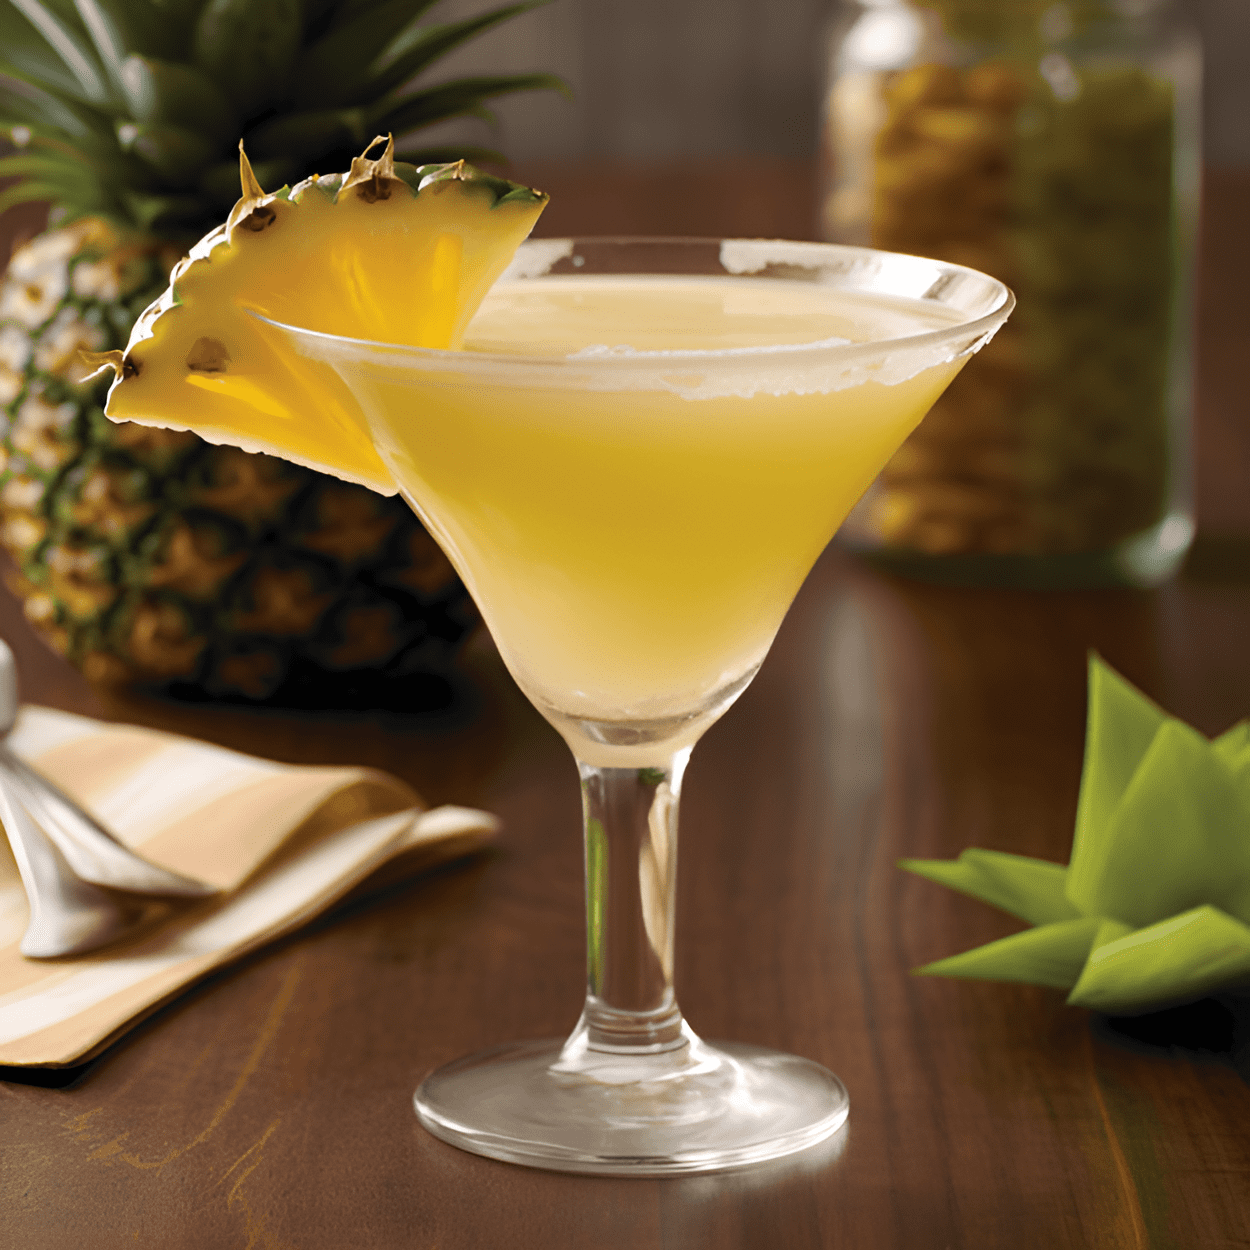 Tuaca Pineapple Martini Cocktail Recipe - This cocktail is a delightful mix of sweet, tart, and slightly creamy. The pineapple juice gives it a tropical sweetness, while the Tuaca adds a hint of vanilla and citrus. The finish is smooth and refreshing.